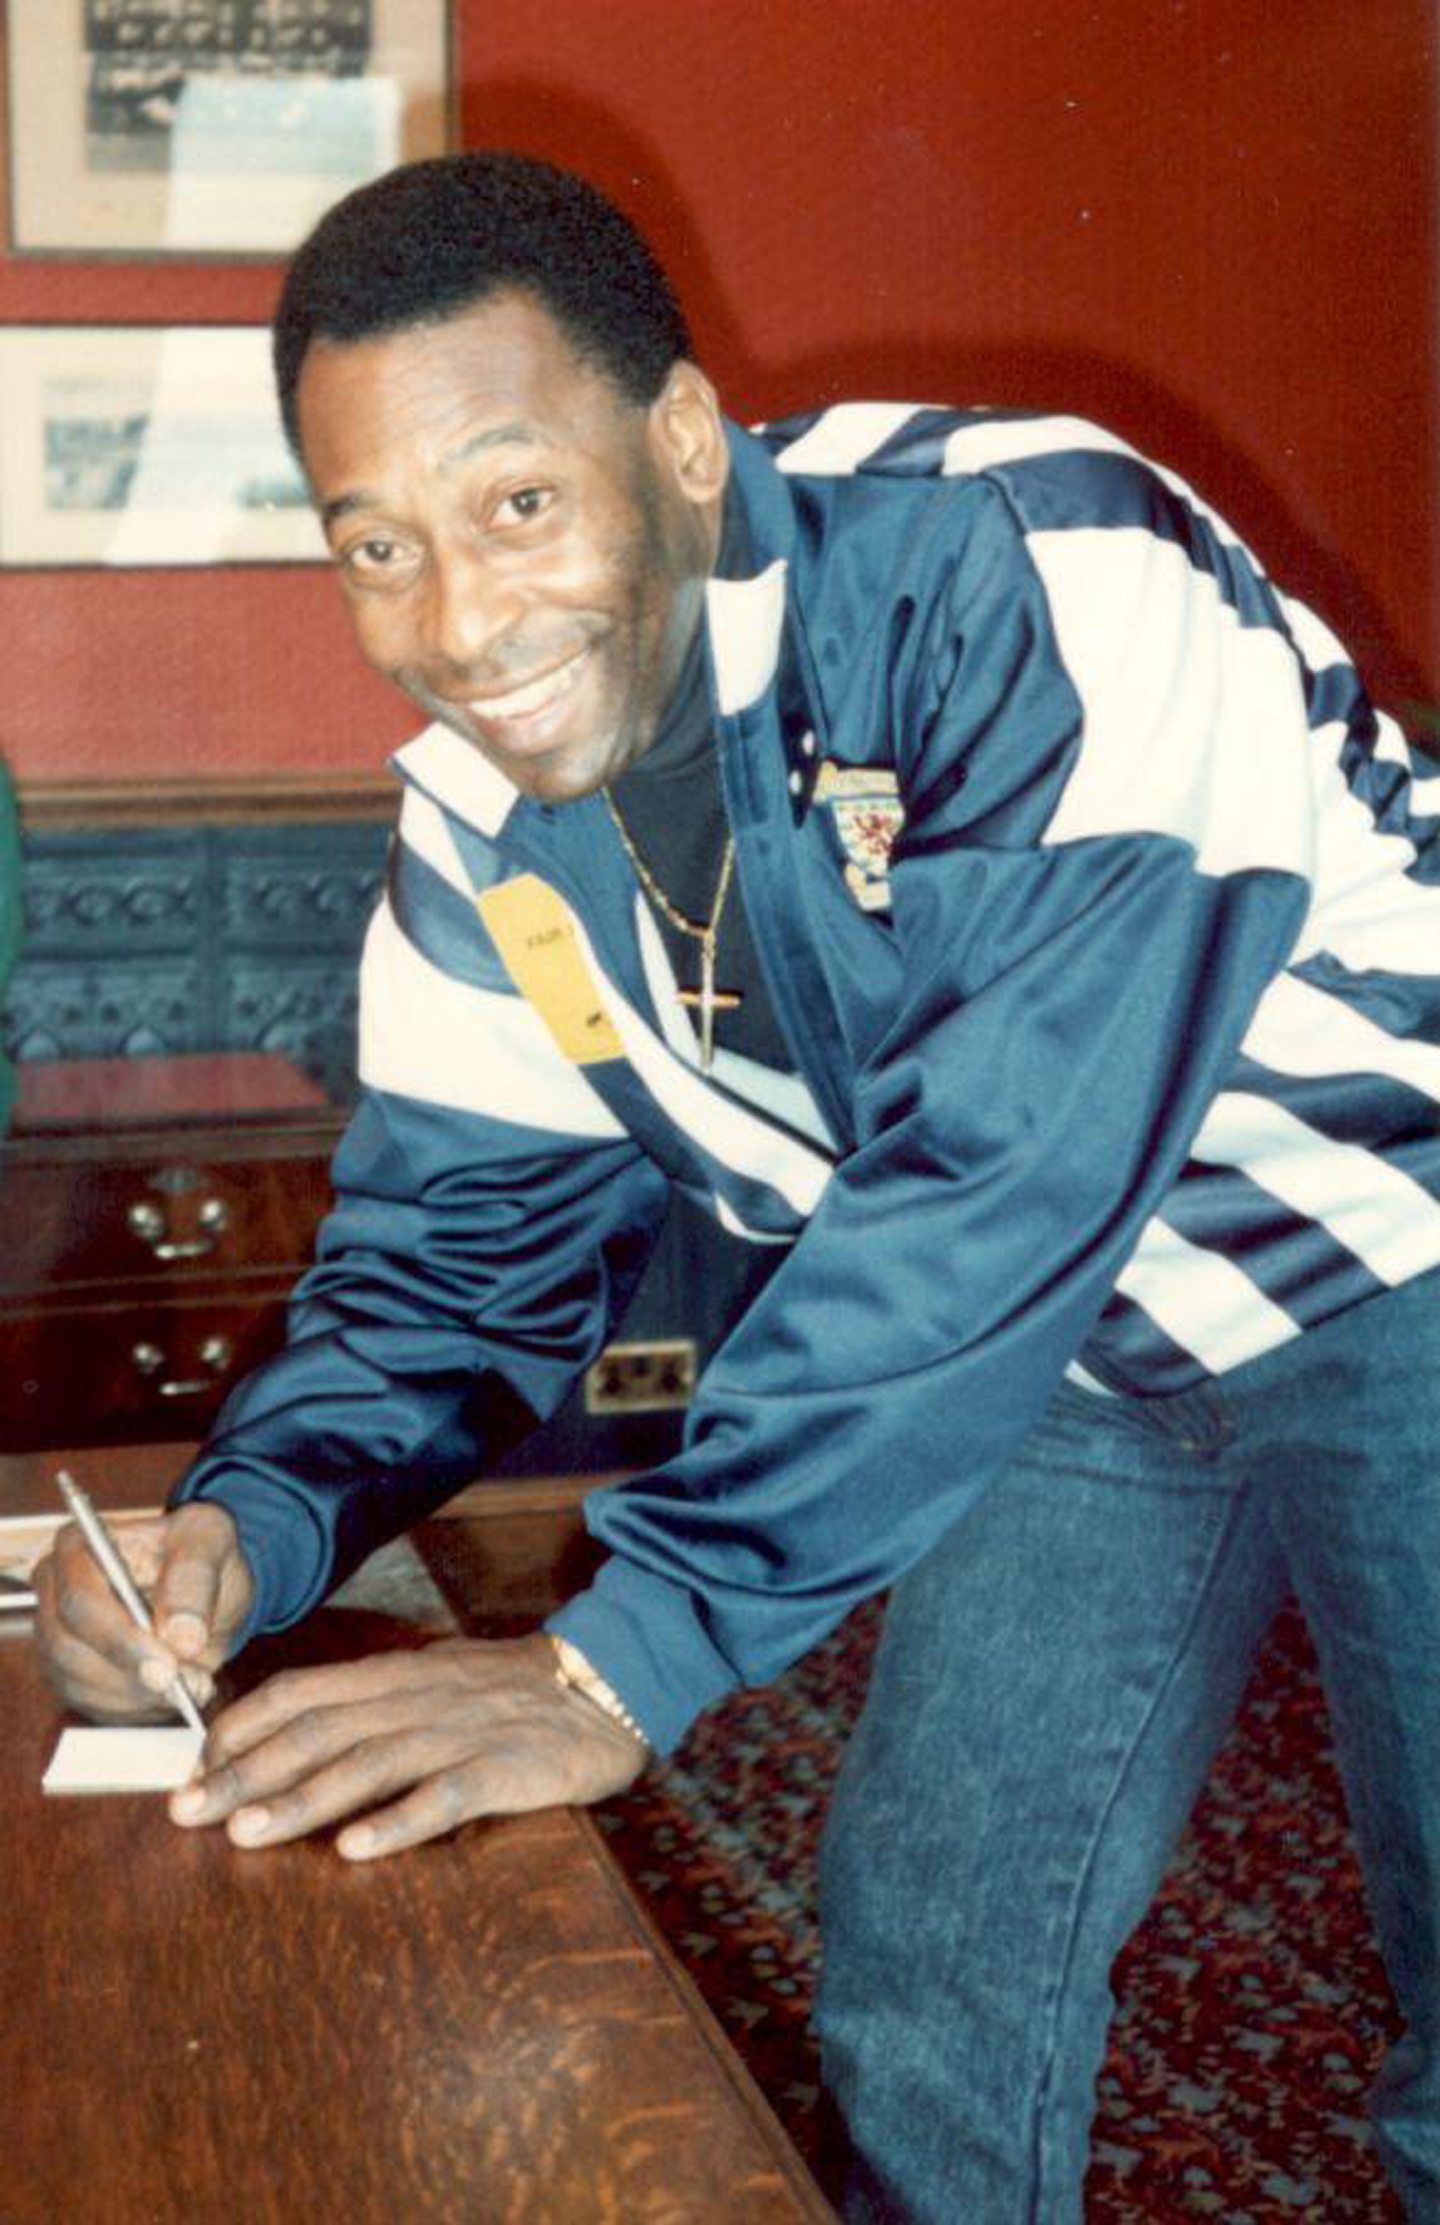 Pele poses for a photo in a Scotland top in Dundee